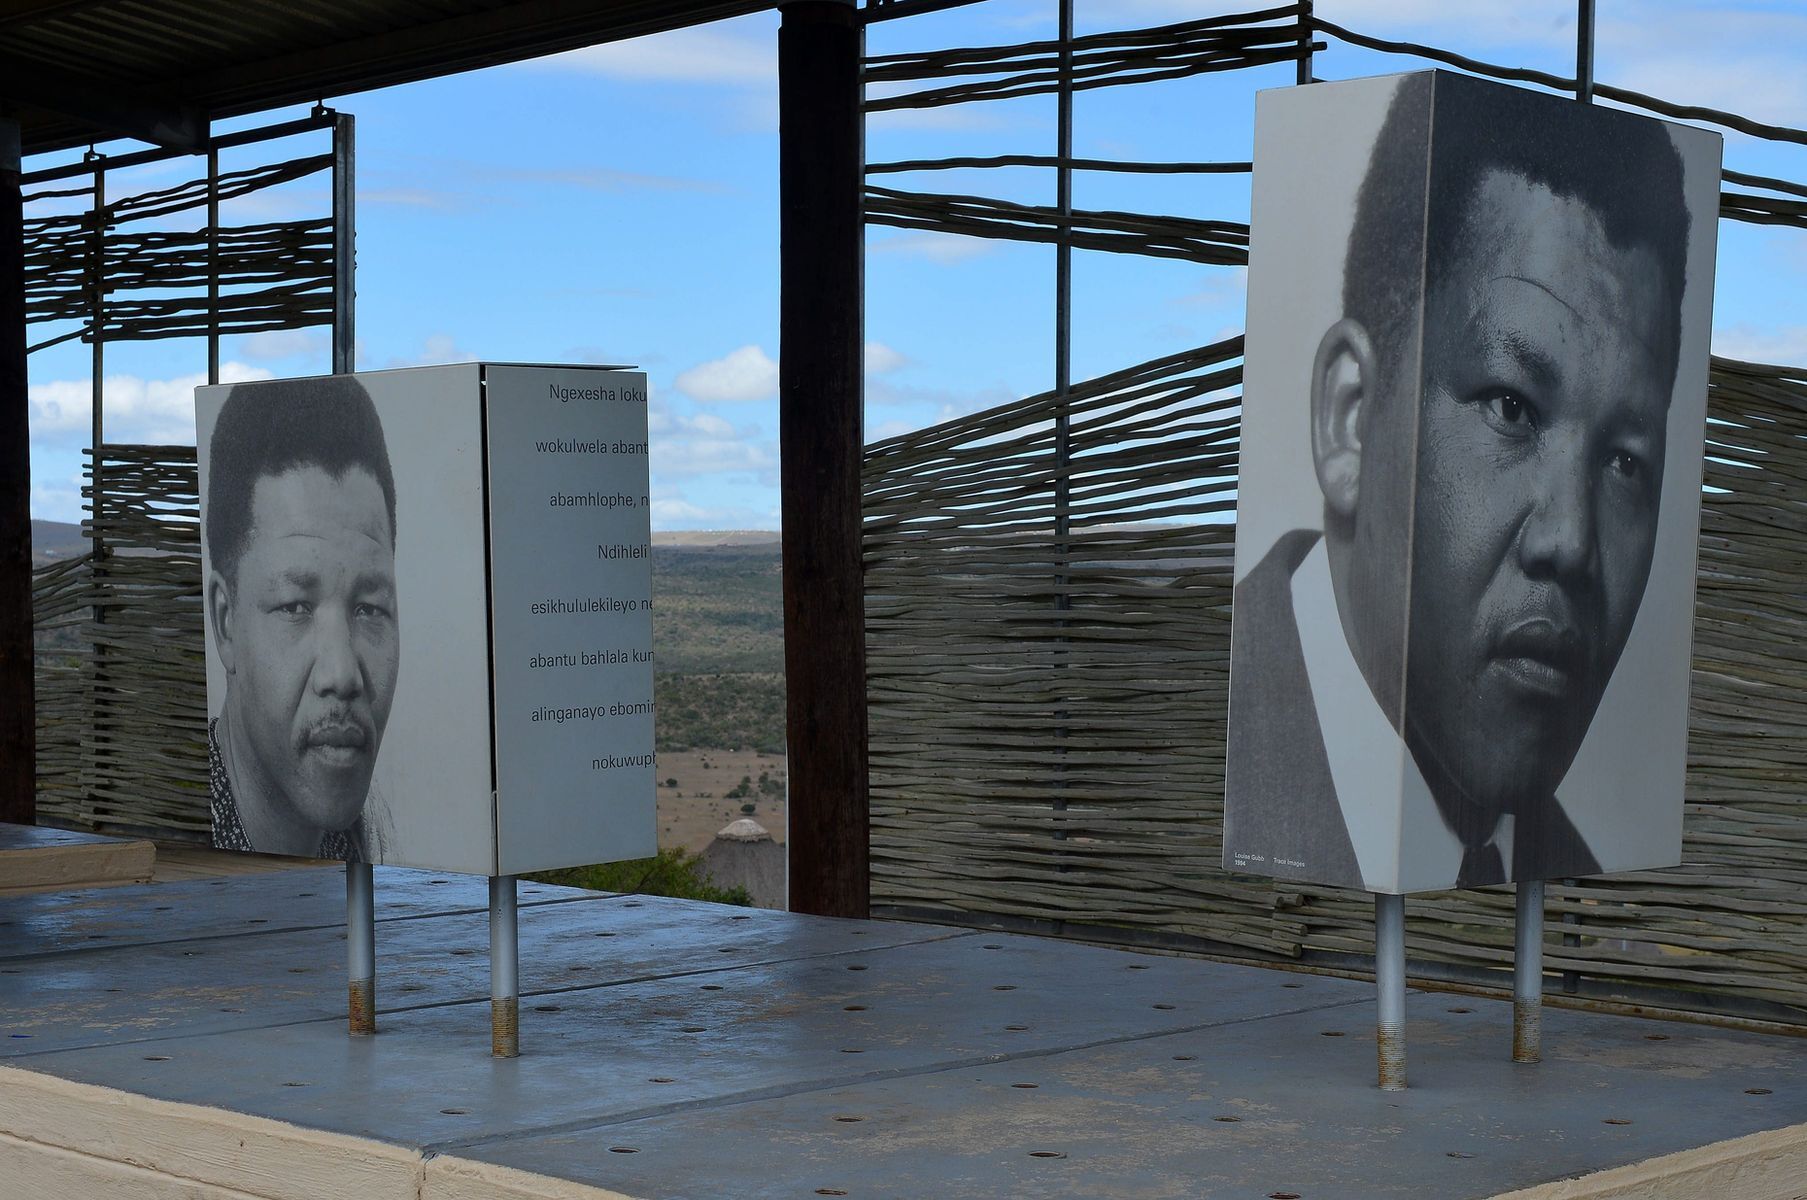 <p>In 1963, Mandela and several other anti-apartheid activists were accused of sabotage for which they faced the death penalty. Mandela transformed the <a href="https://www.sahistory.org.za/article/rivonia-trial-1963-1964" rel="noreferrer noopener">Rivonia trial</a> into a platform from which to express his political thoughts. “I have fought against white domination, and I have fought against black domination. I have cherished the ideal of a democratic and free society in which all persons live together in harmony and with equal opportunities. It is an ideal which I hope to live for and to achieve. But if needs be, it is an ideal for which I am prepared to die,” <a href="https://today.law.harvard.edu/honor-nelson-mandela-ever-violence-justifiable-struggles-political-social-change-video/" rel="noreferrer noopener">he stated</a>.</p>